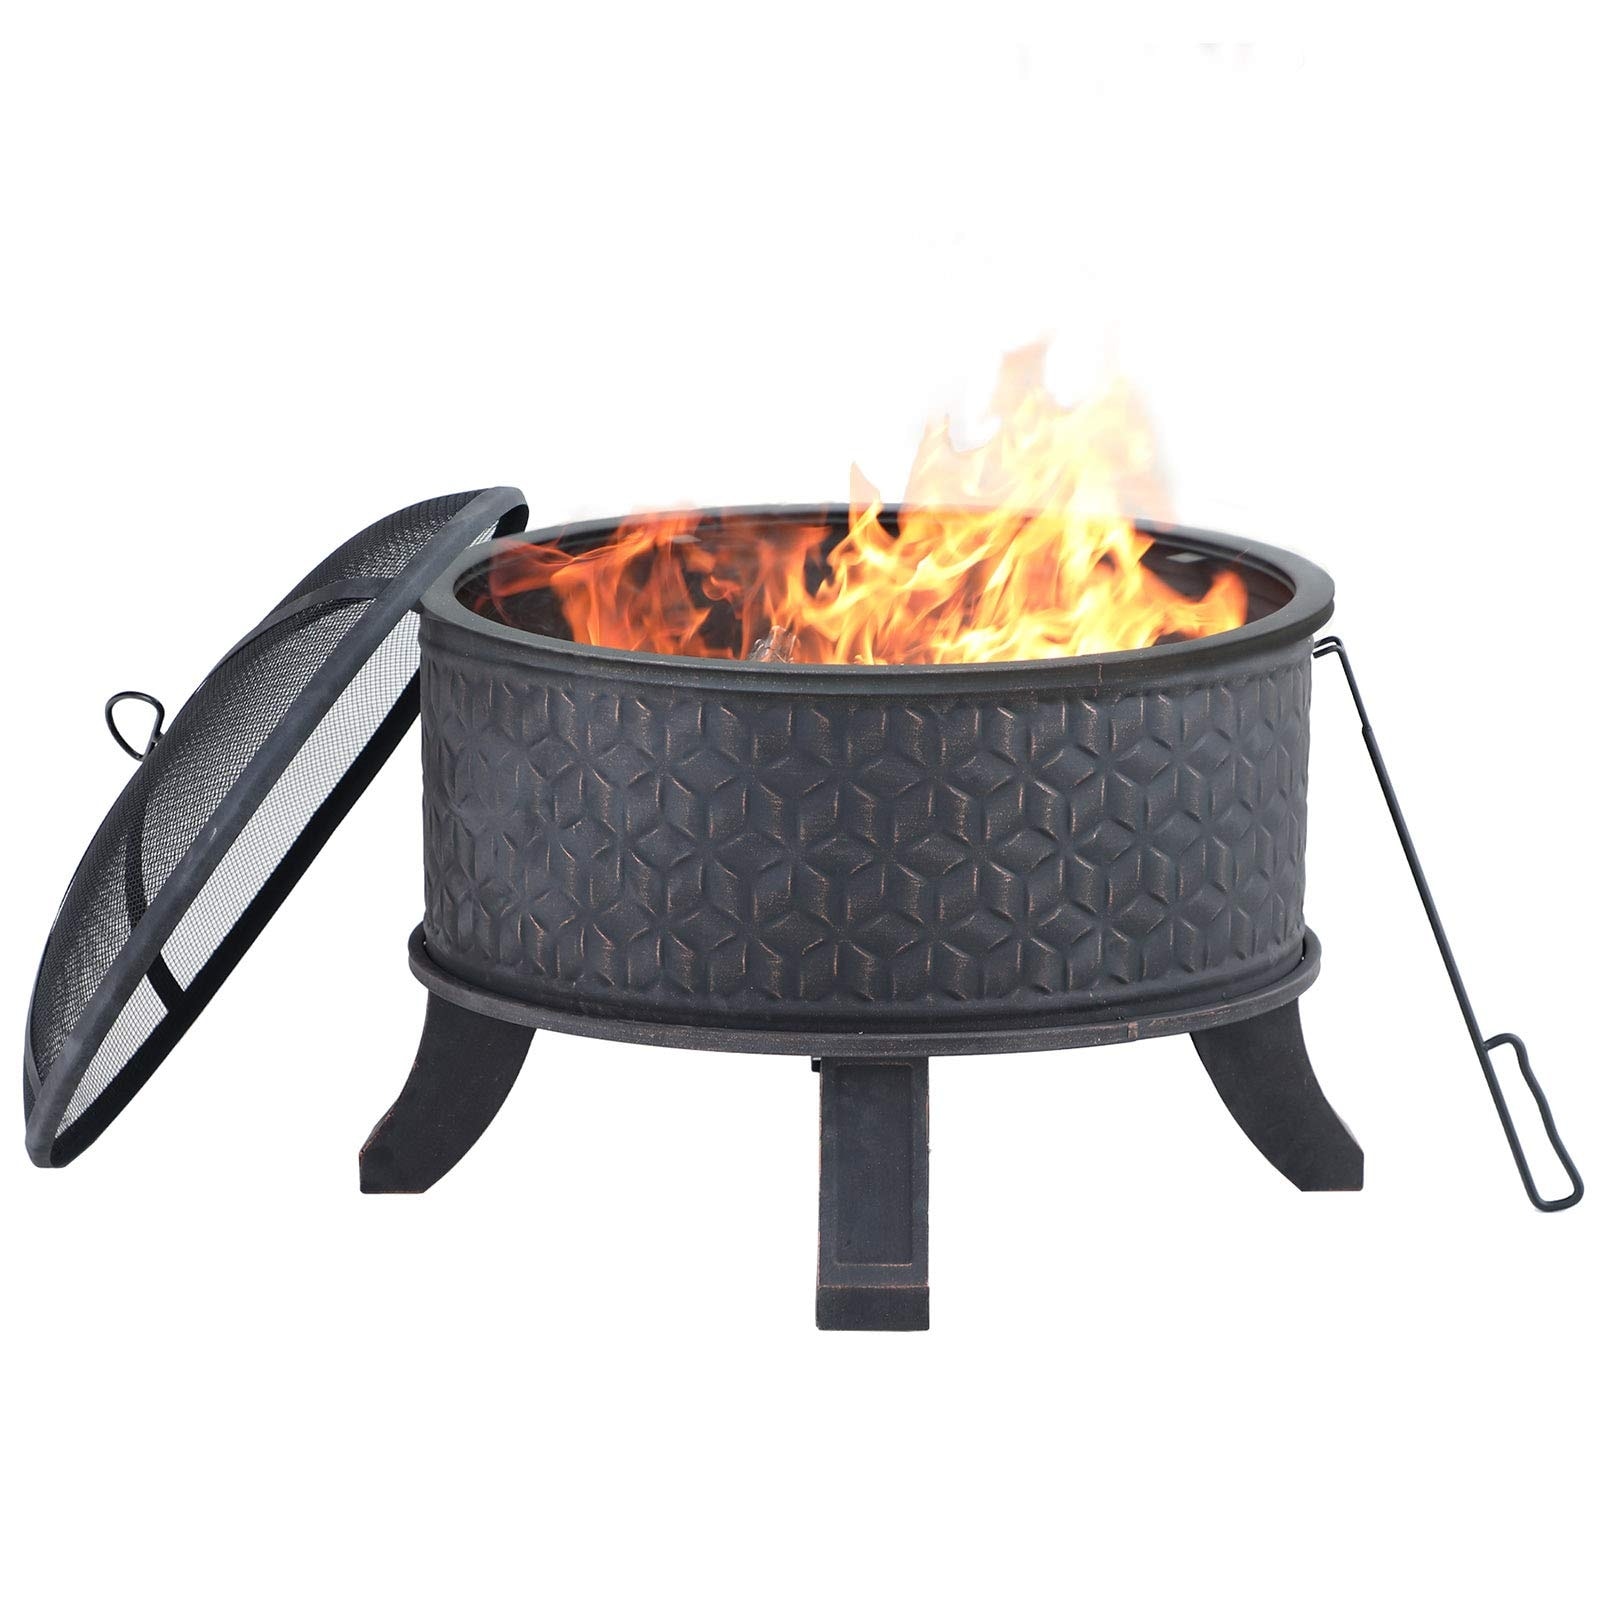 Sophia and William Outdoor Wood Buring Fire Pit 26.4 inch Dia x 17.7 H Heavy Duty, Large Patio Steel Bonfire BBQ Grill Firepit